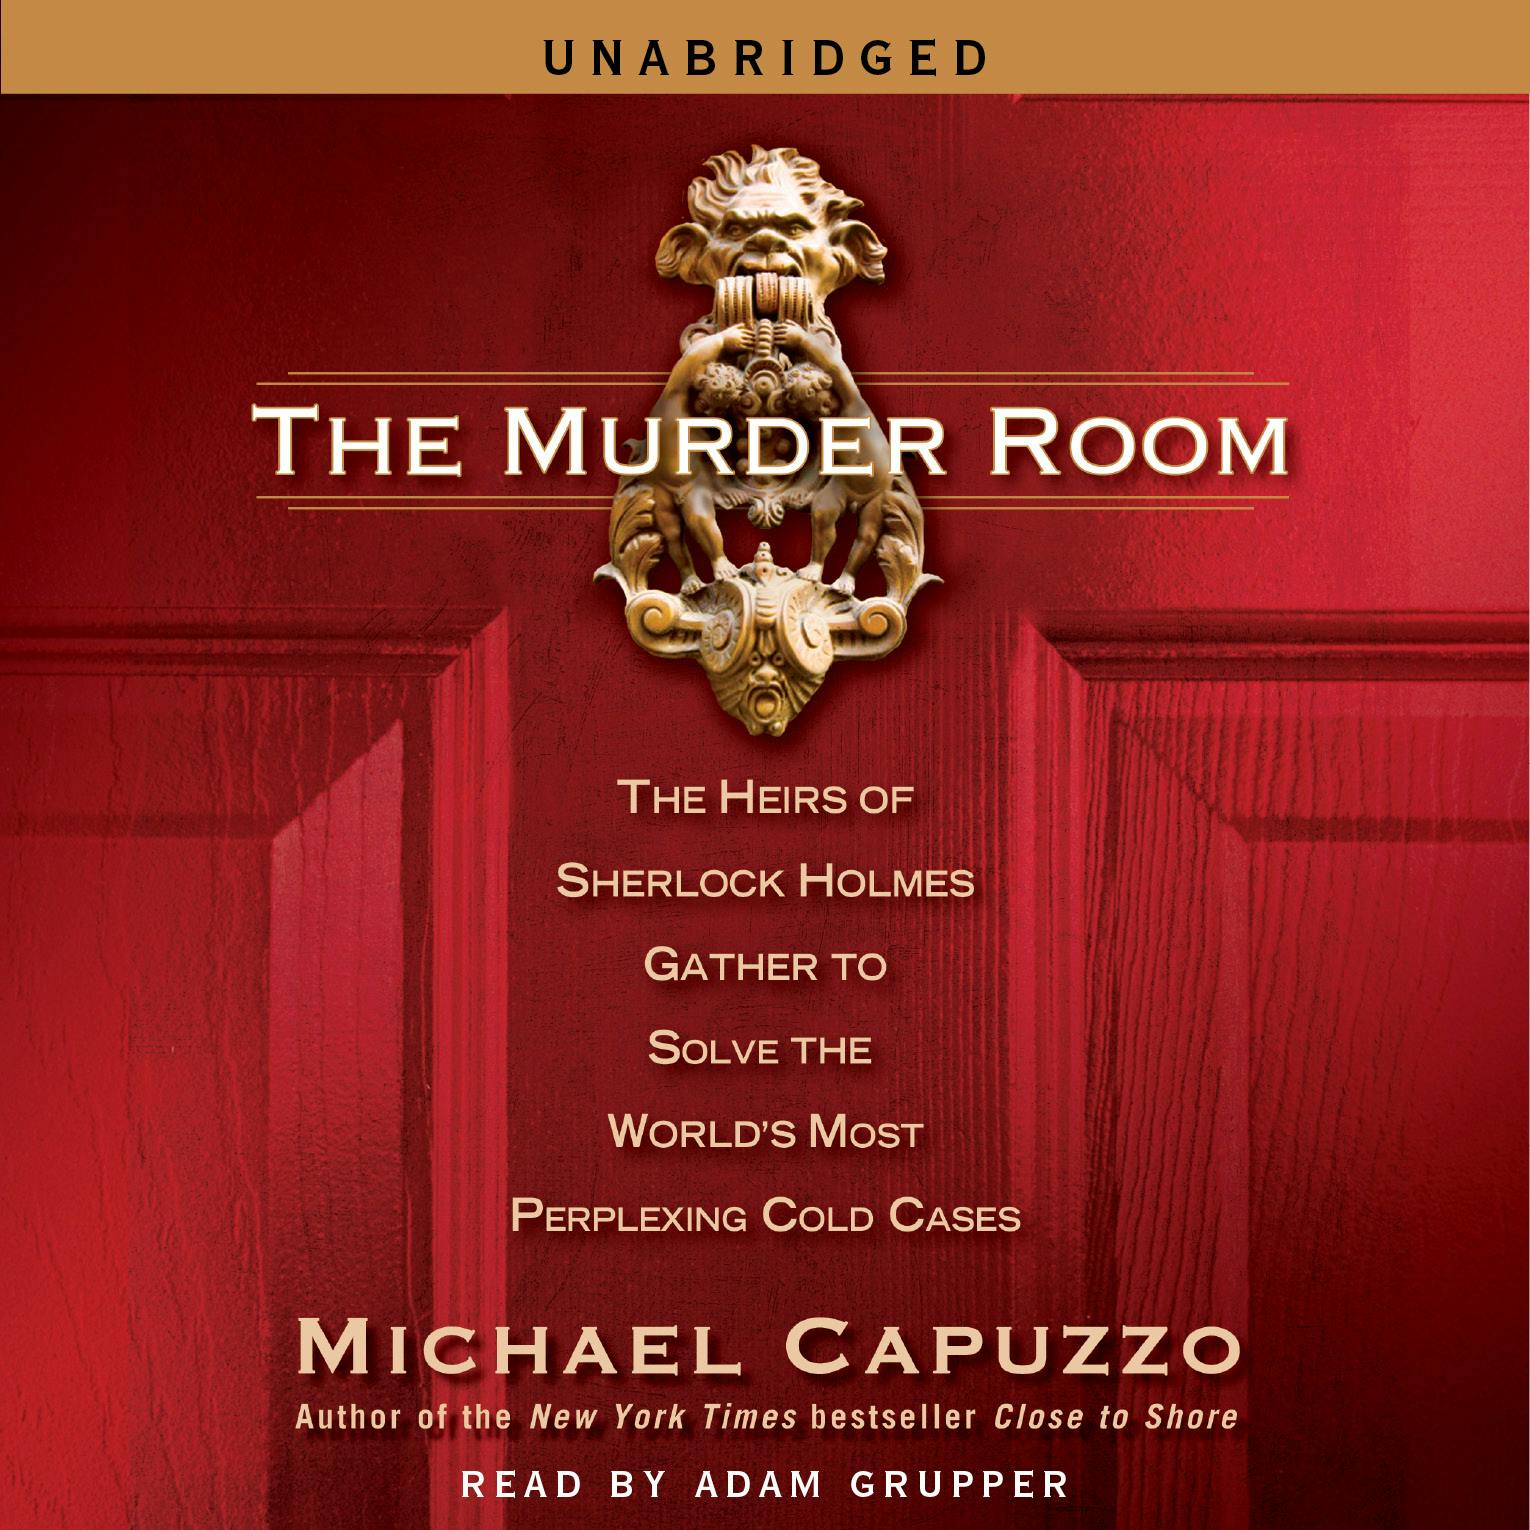 The Murder Room: The Heirs of Sherlock Holmes Gather to Solve the World's Most Perplexing Cold Cases - Michael Capuzzo